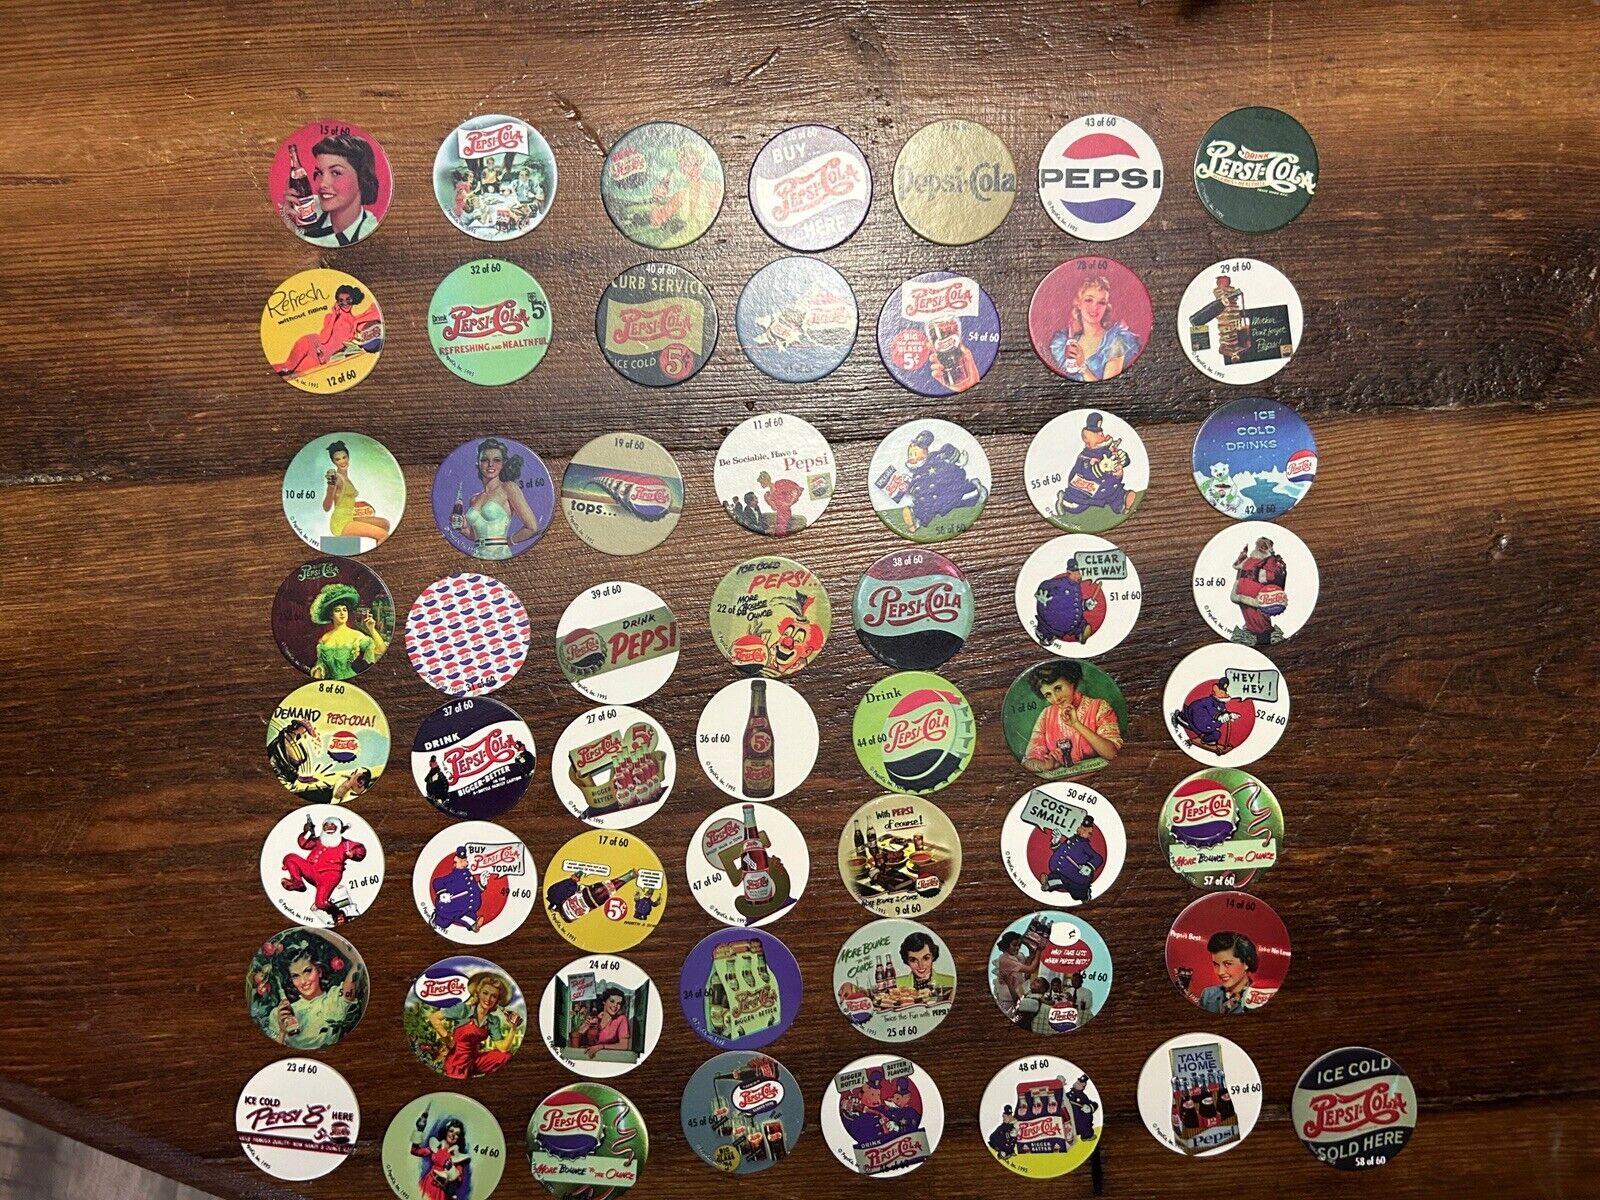 57 Of 1995 Pepsi Cola Retro Design Pogs Official Licensed Excellently Lot 15